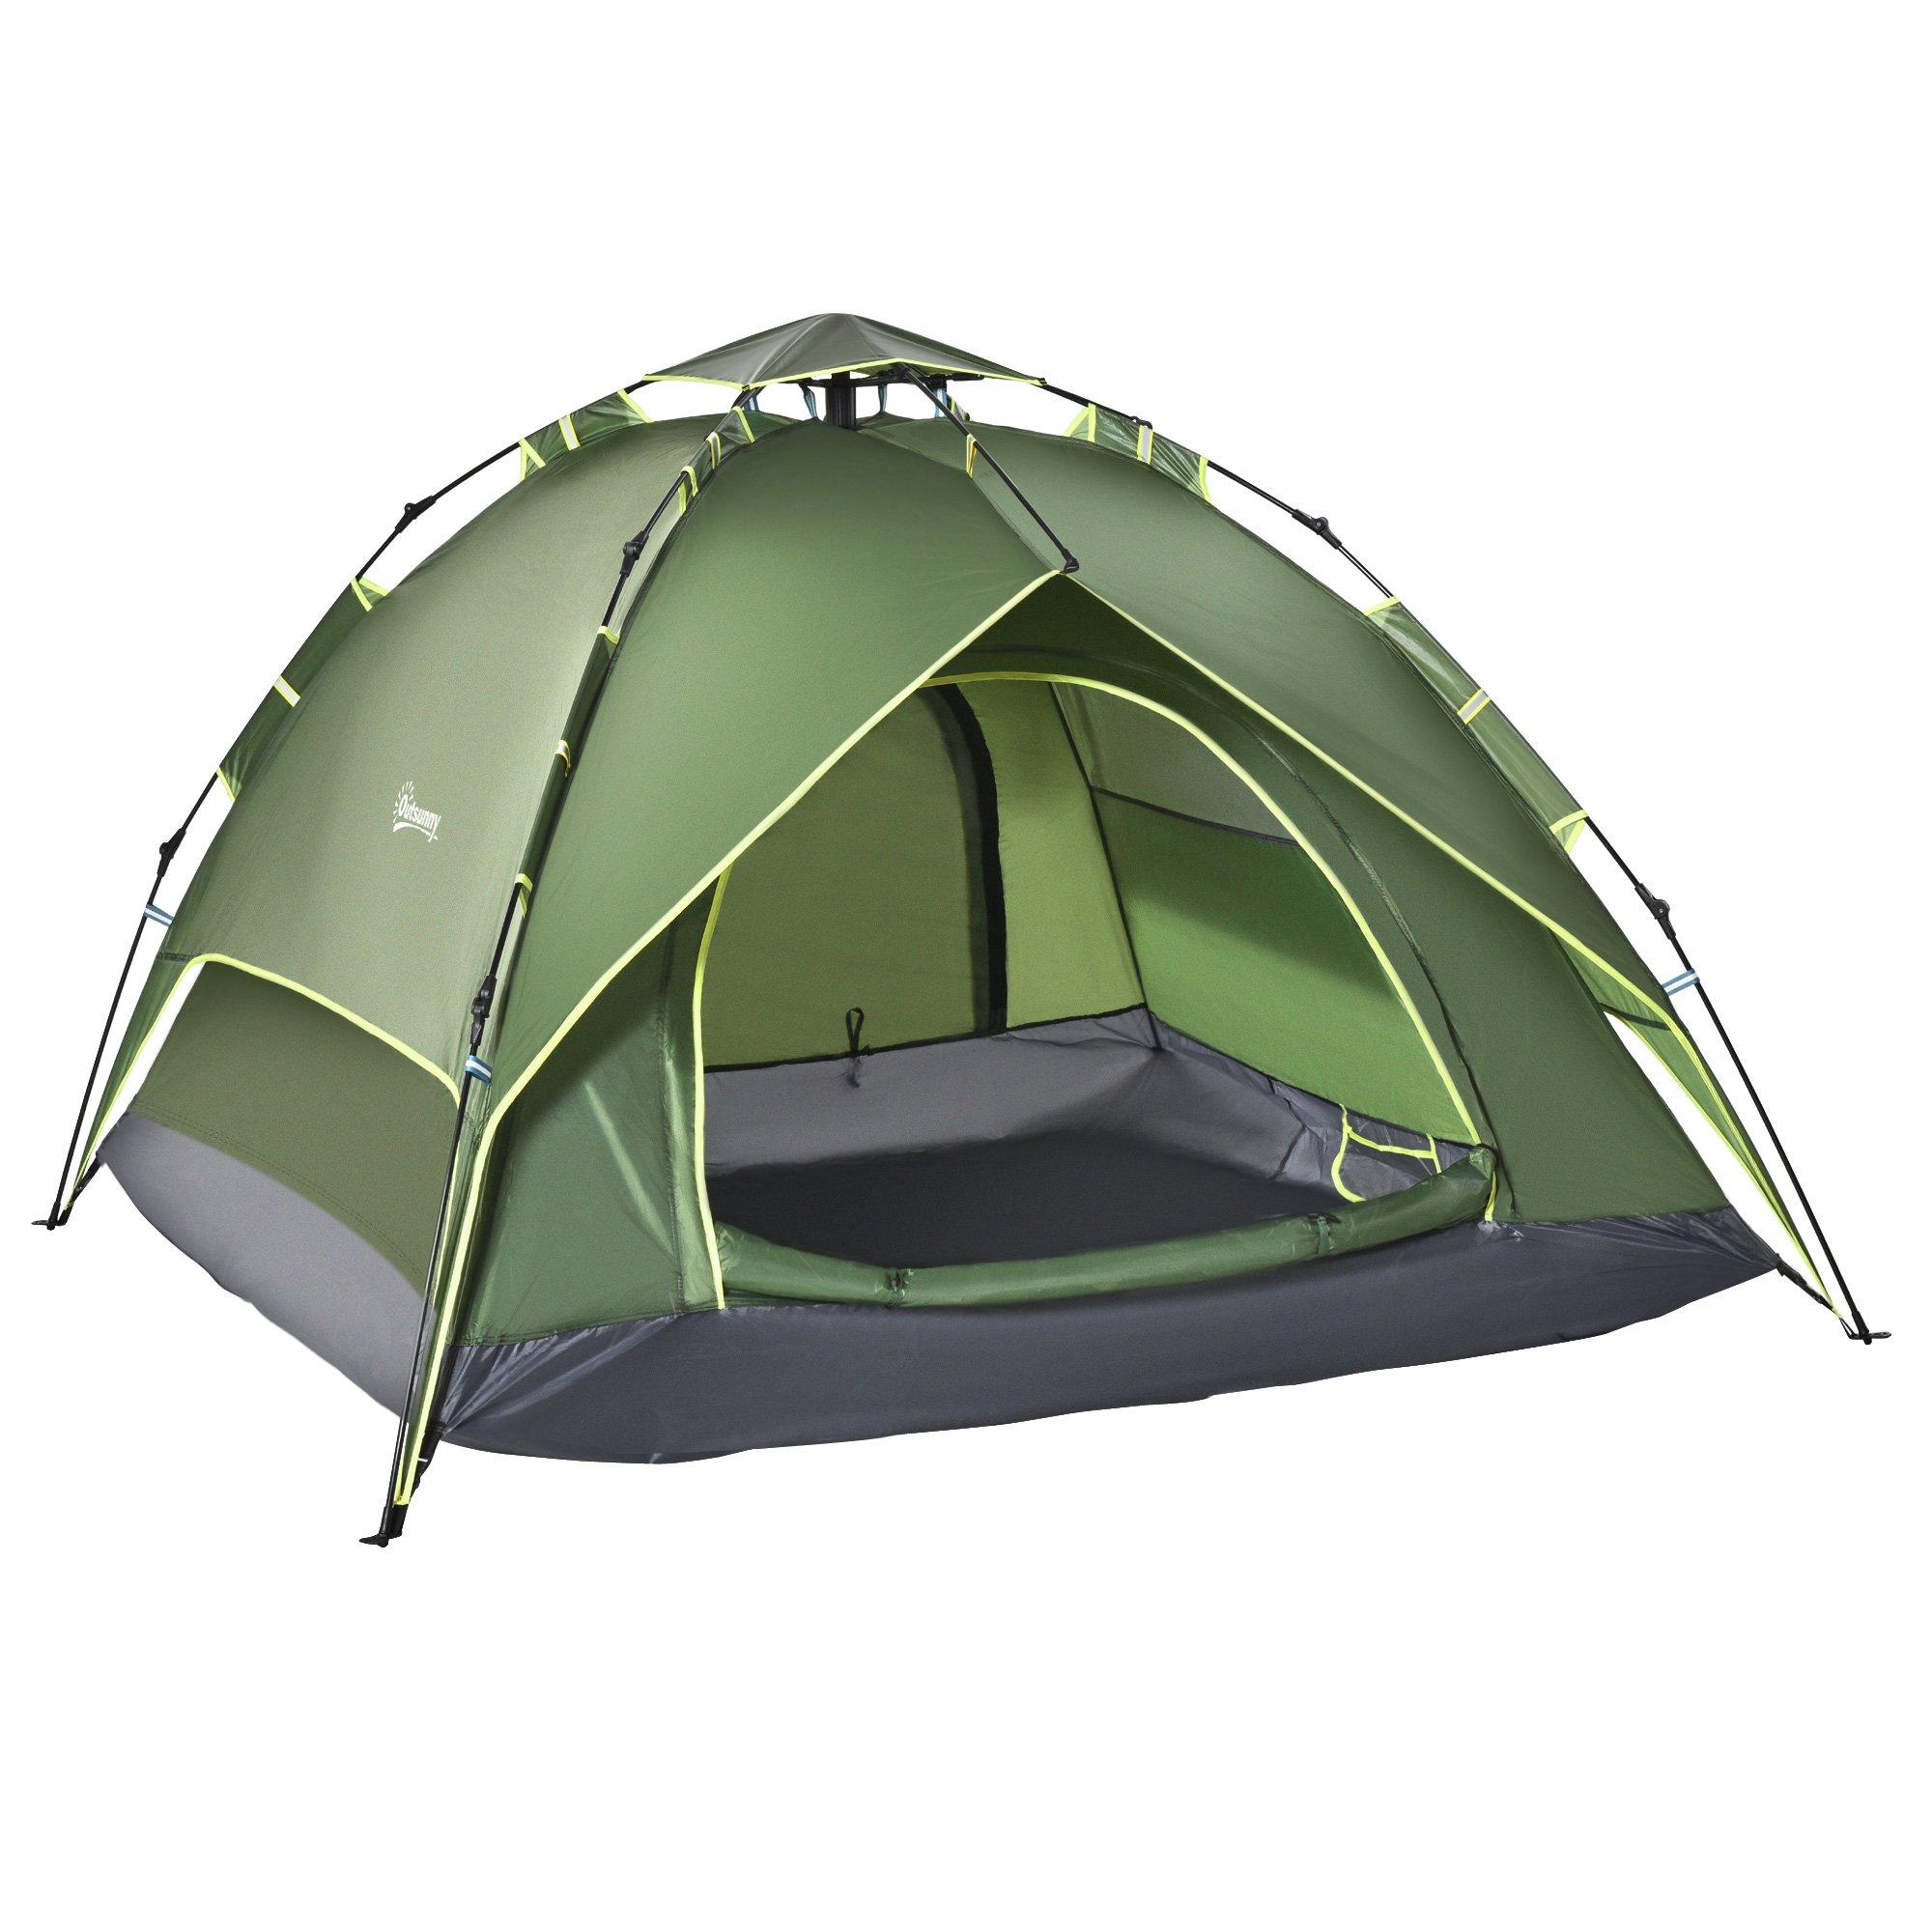 2 Man Pop Up Tent Camping Festival Hiking Family Travel Shelter